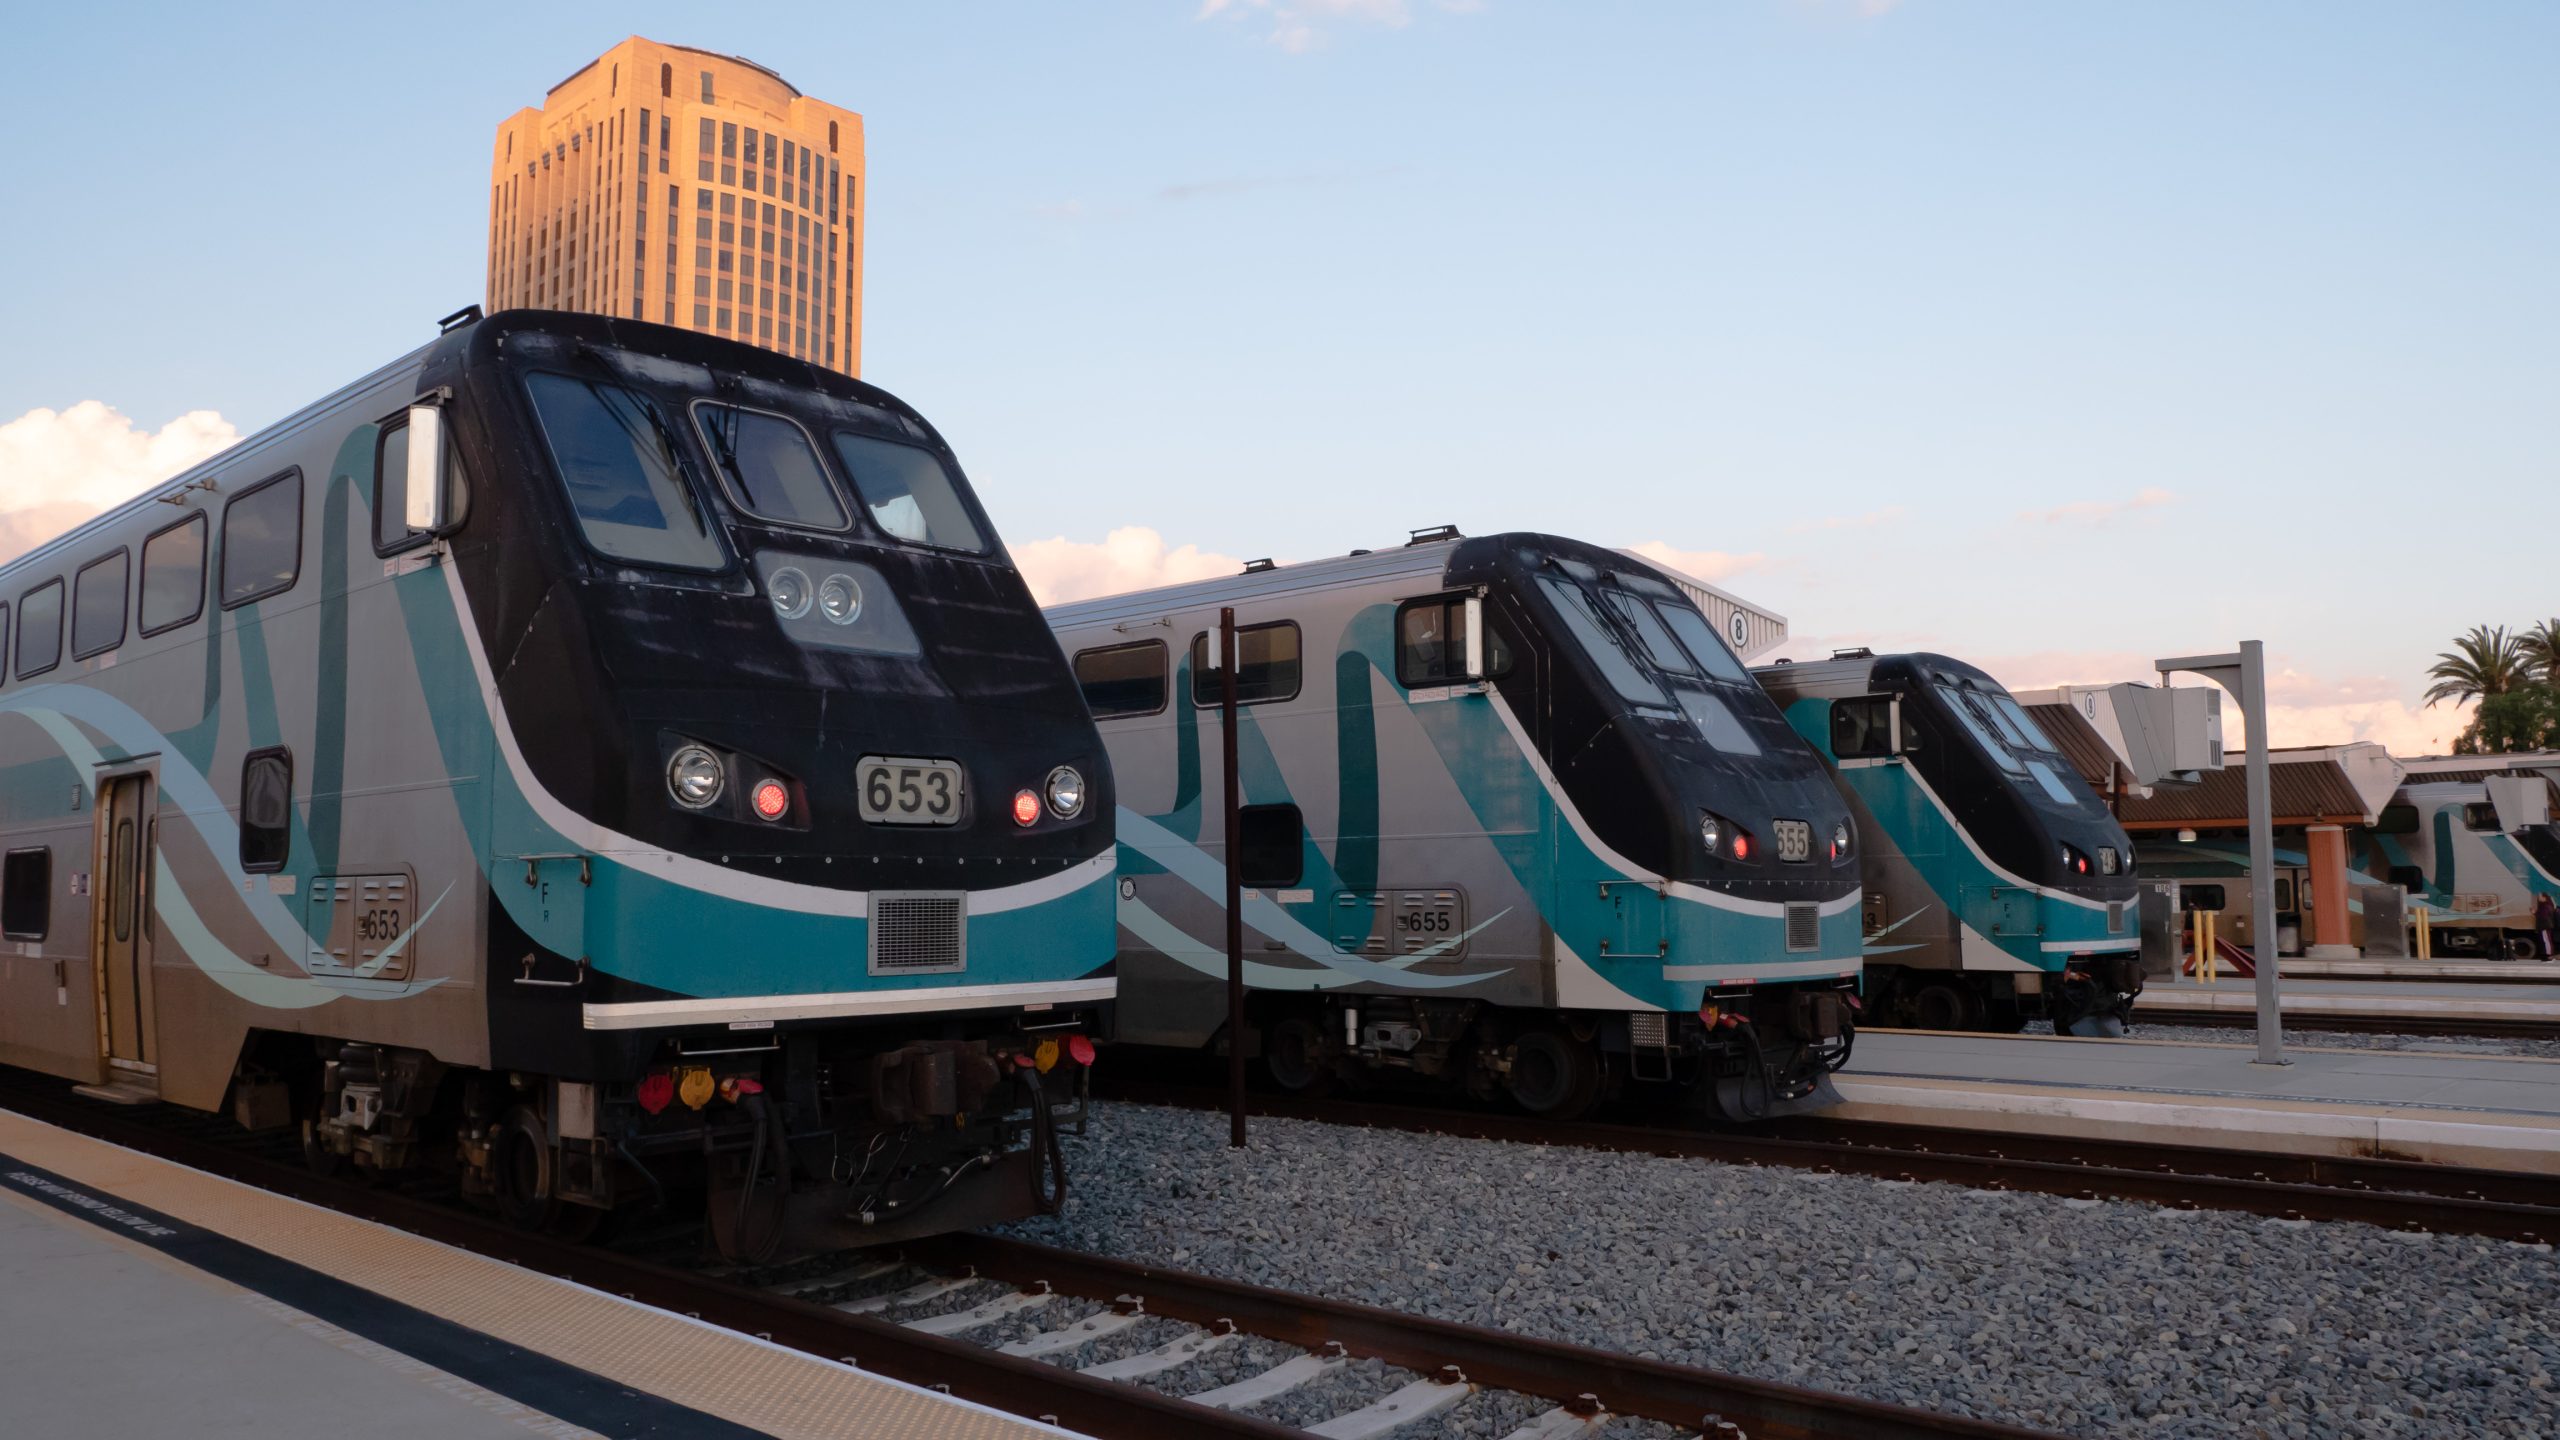 Students get free rides on Metrolink trains through March 2024